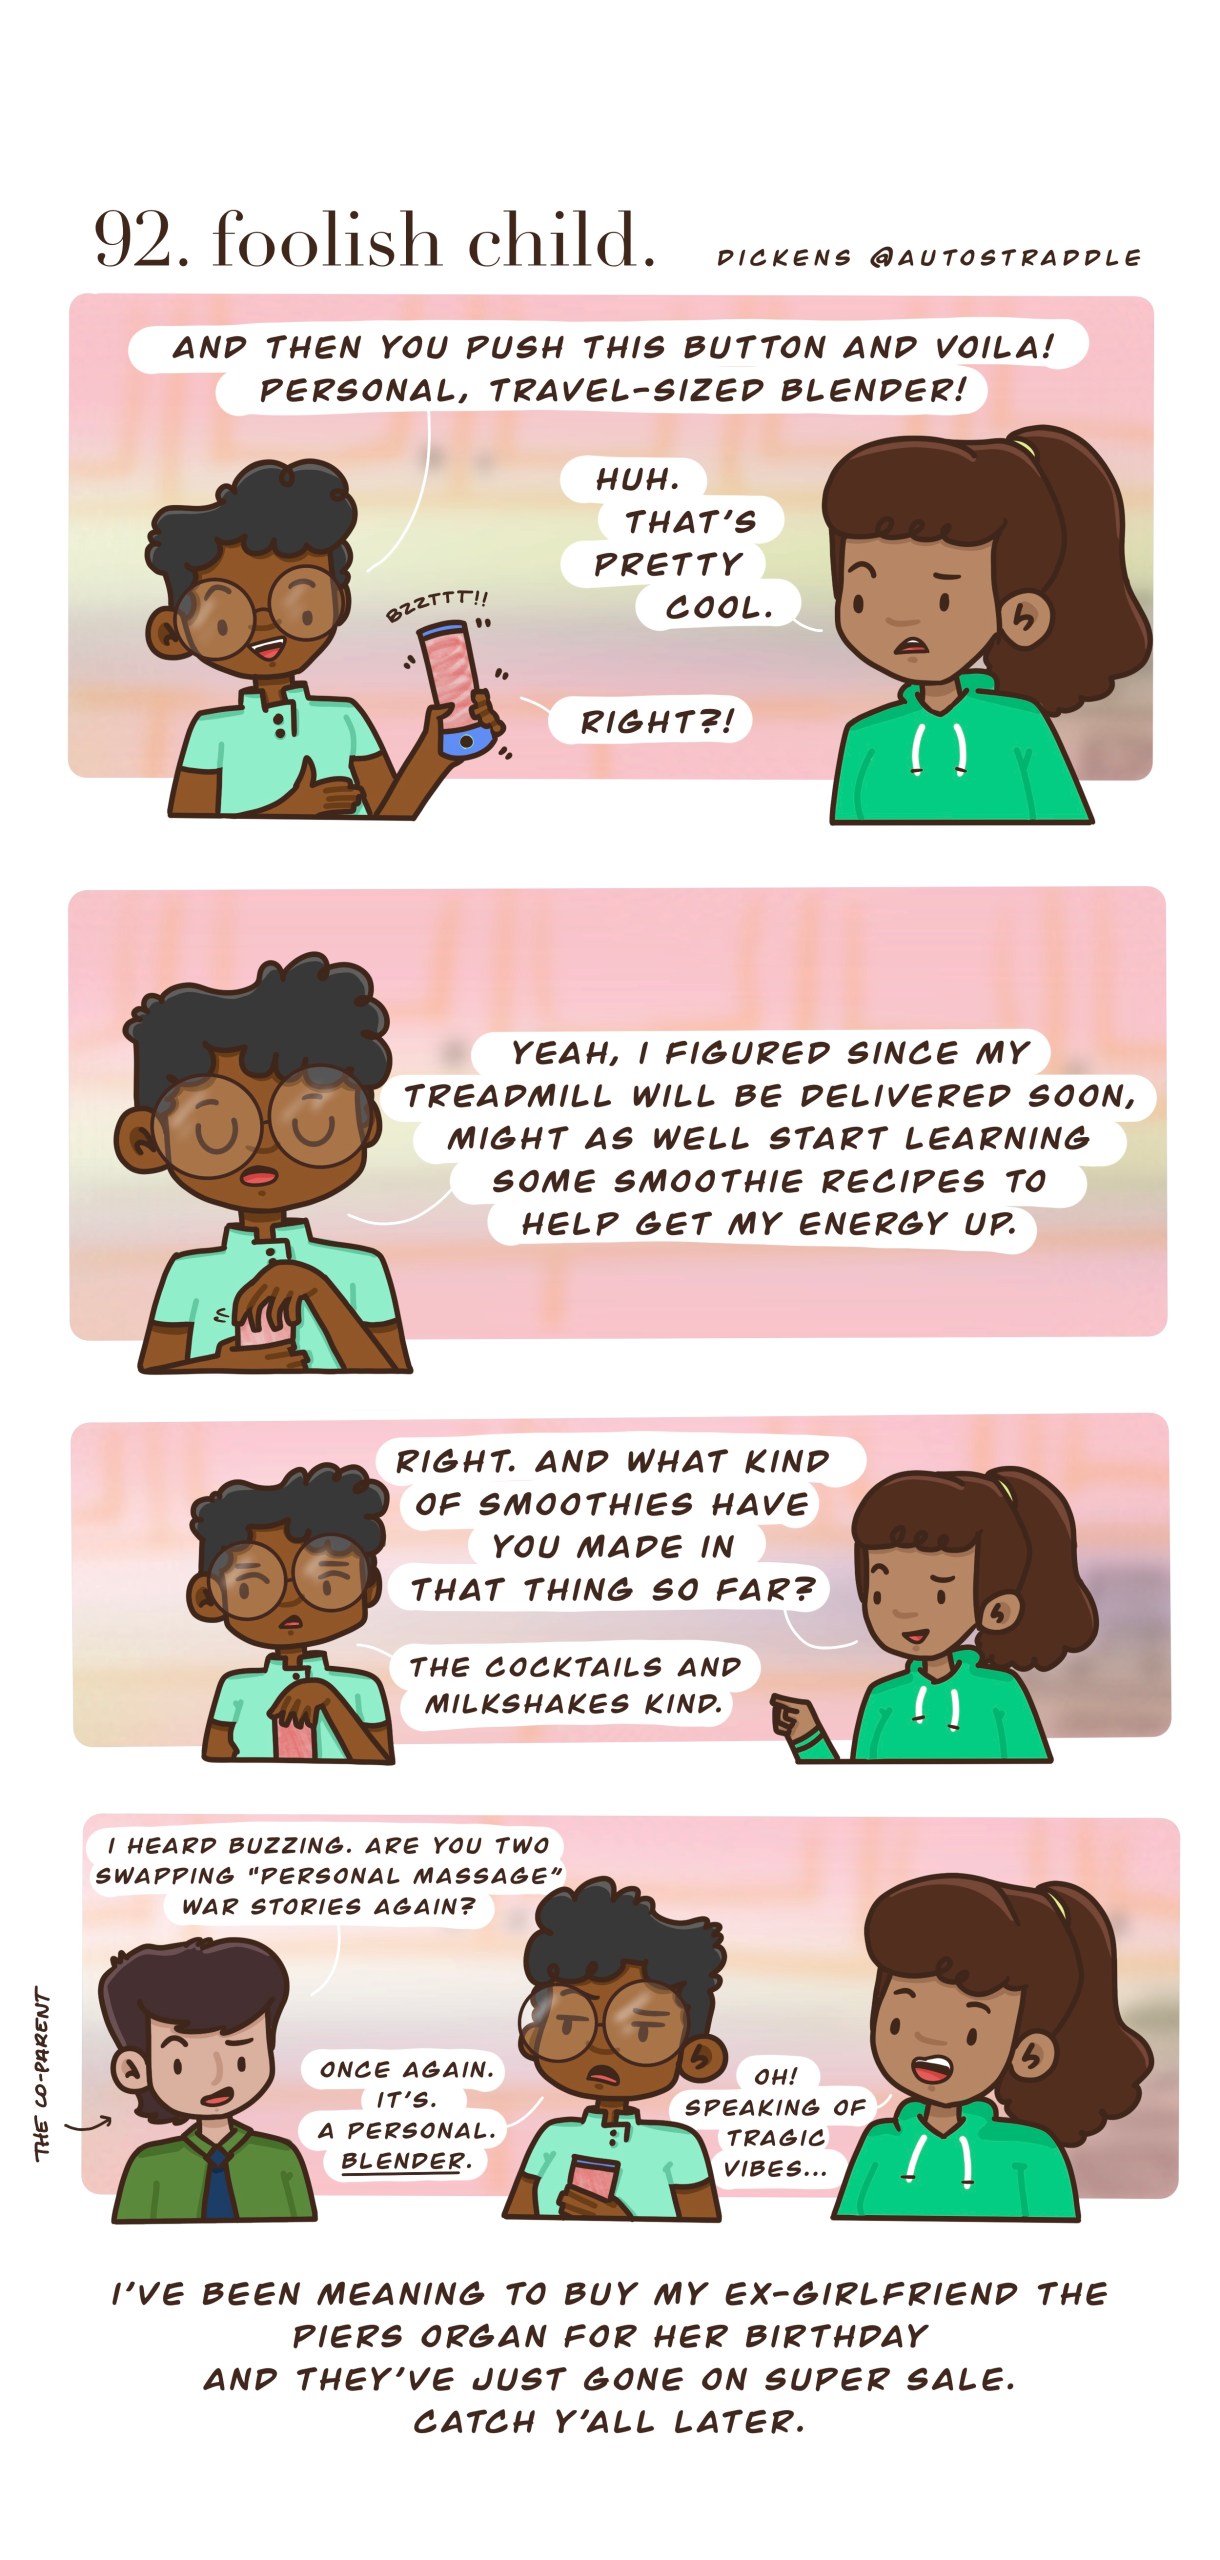 In a four panel drawn comic, Dickens and their friend are in green shirts against a pink background. Dickens is explaining the perks of their new personal blender, which they bought in hopes of getting their energy up to go along with their new treadmill. So far though, they've only made cocktails and milkshakes with it. A third friend joins them, asking "I heard buzzing. Are you two swapping 'personal massage' war stories again?"